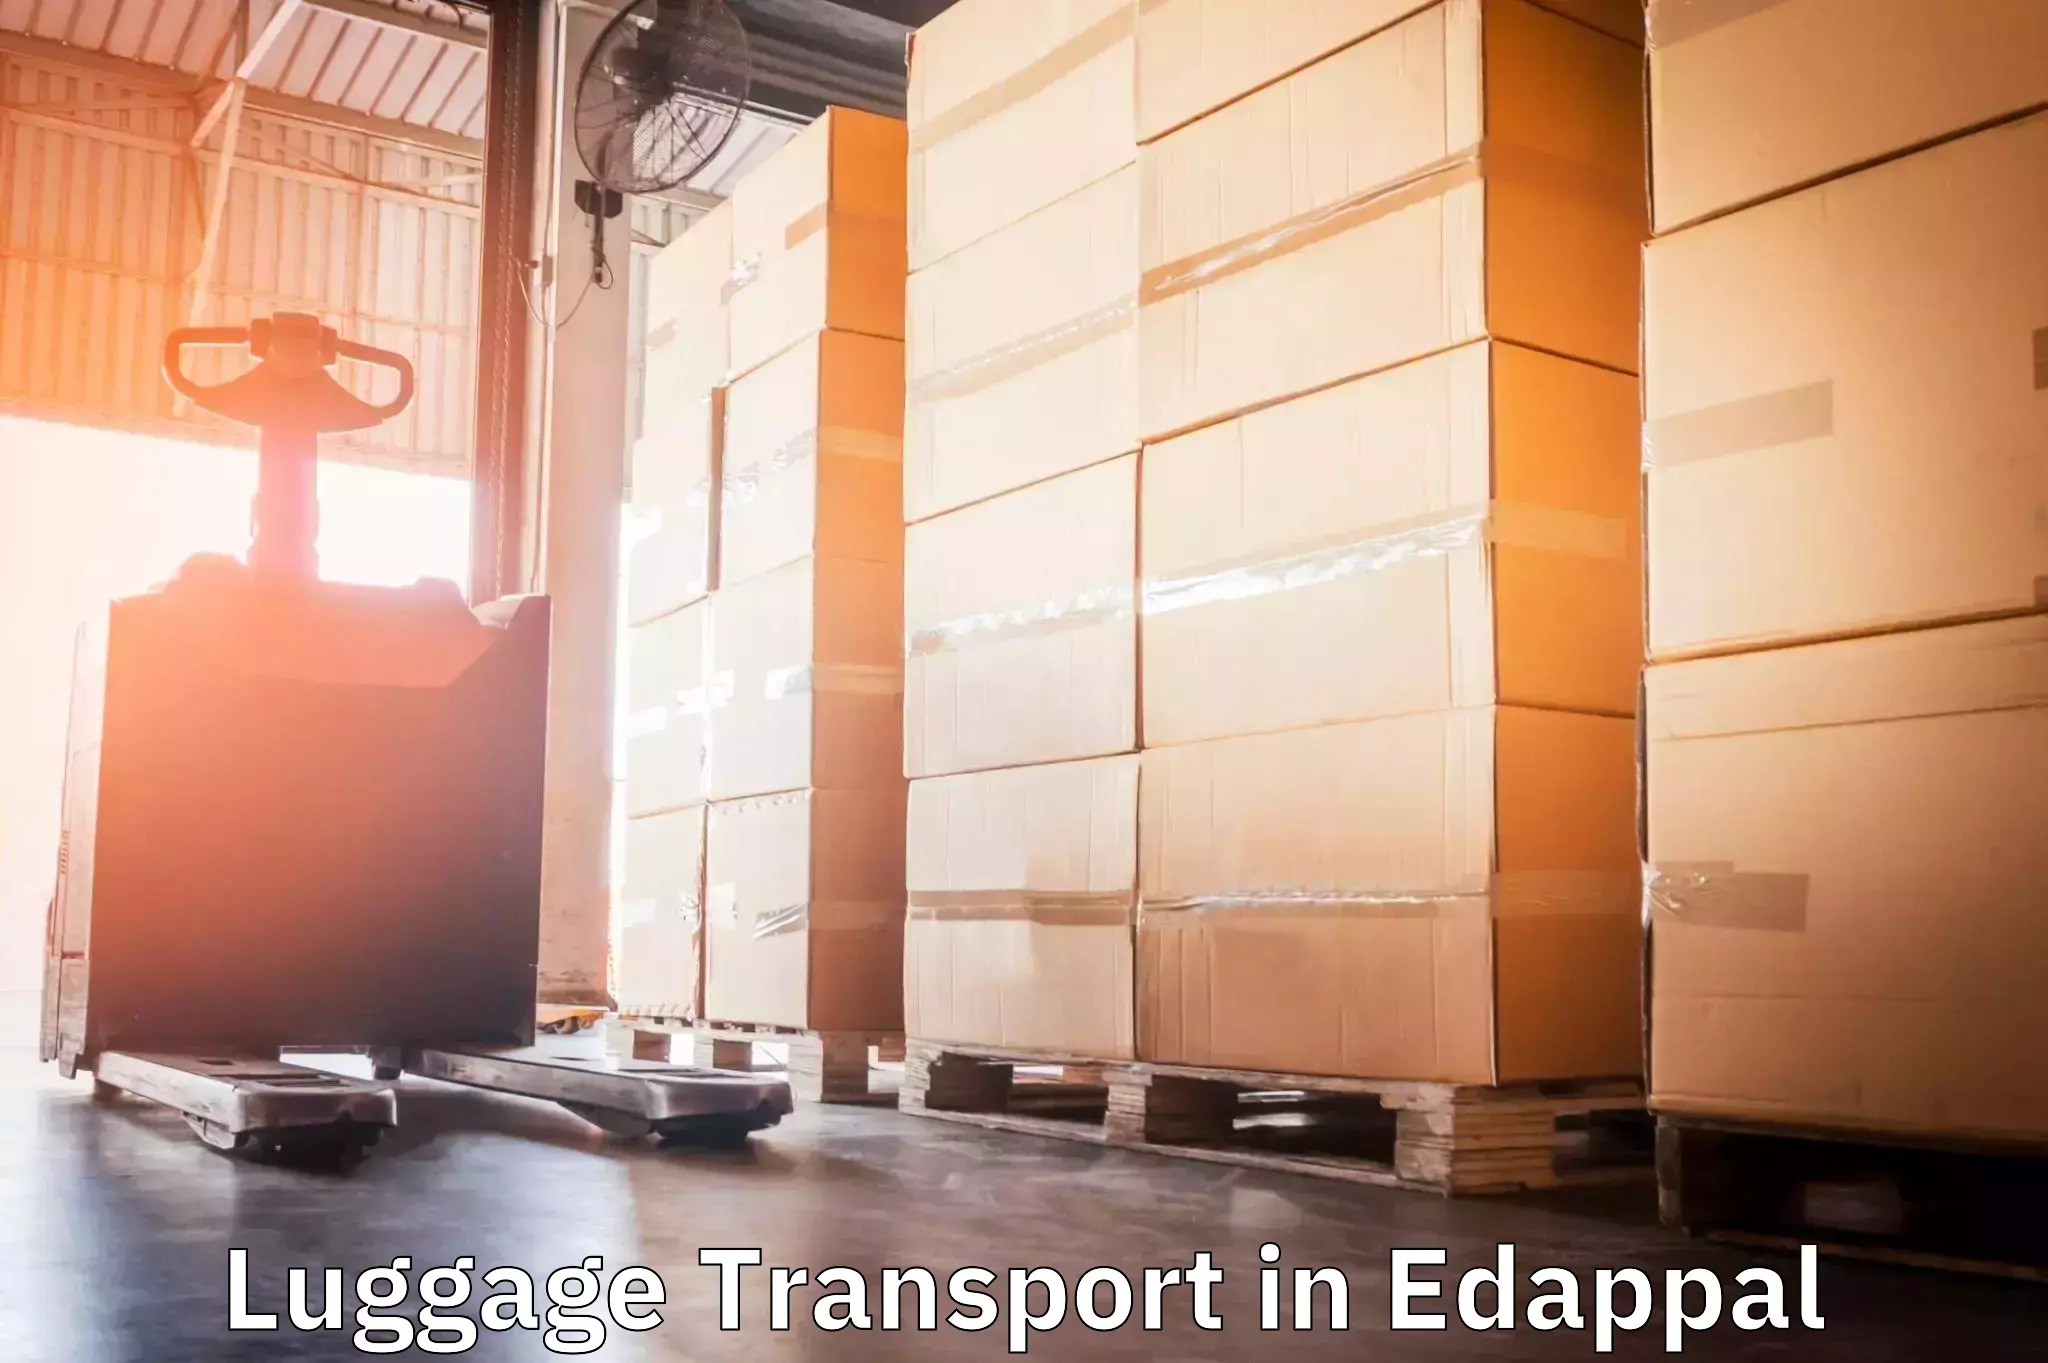 Baggage transport services in Edappal